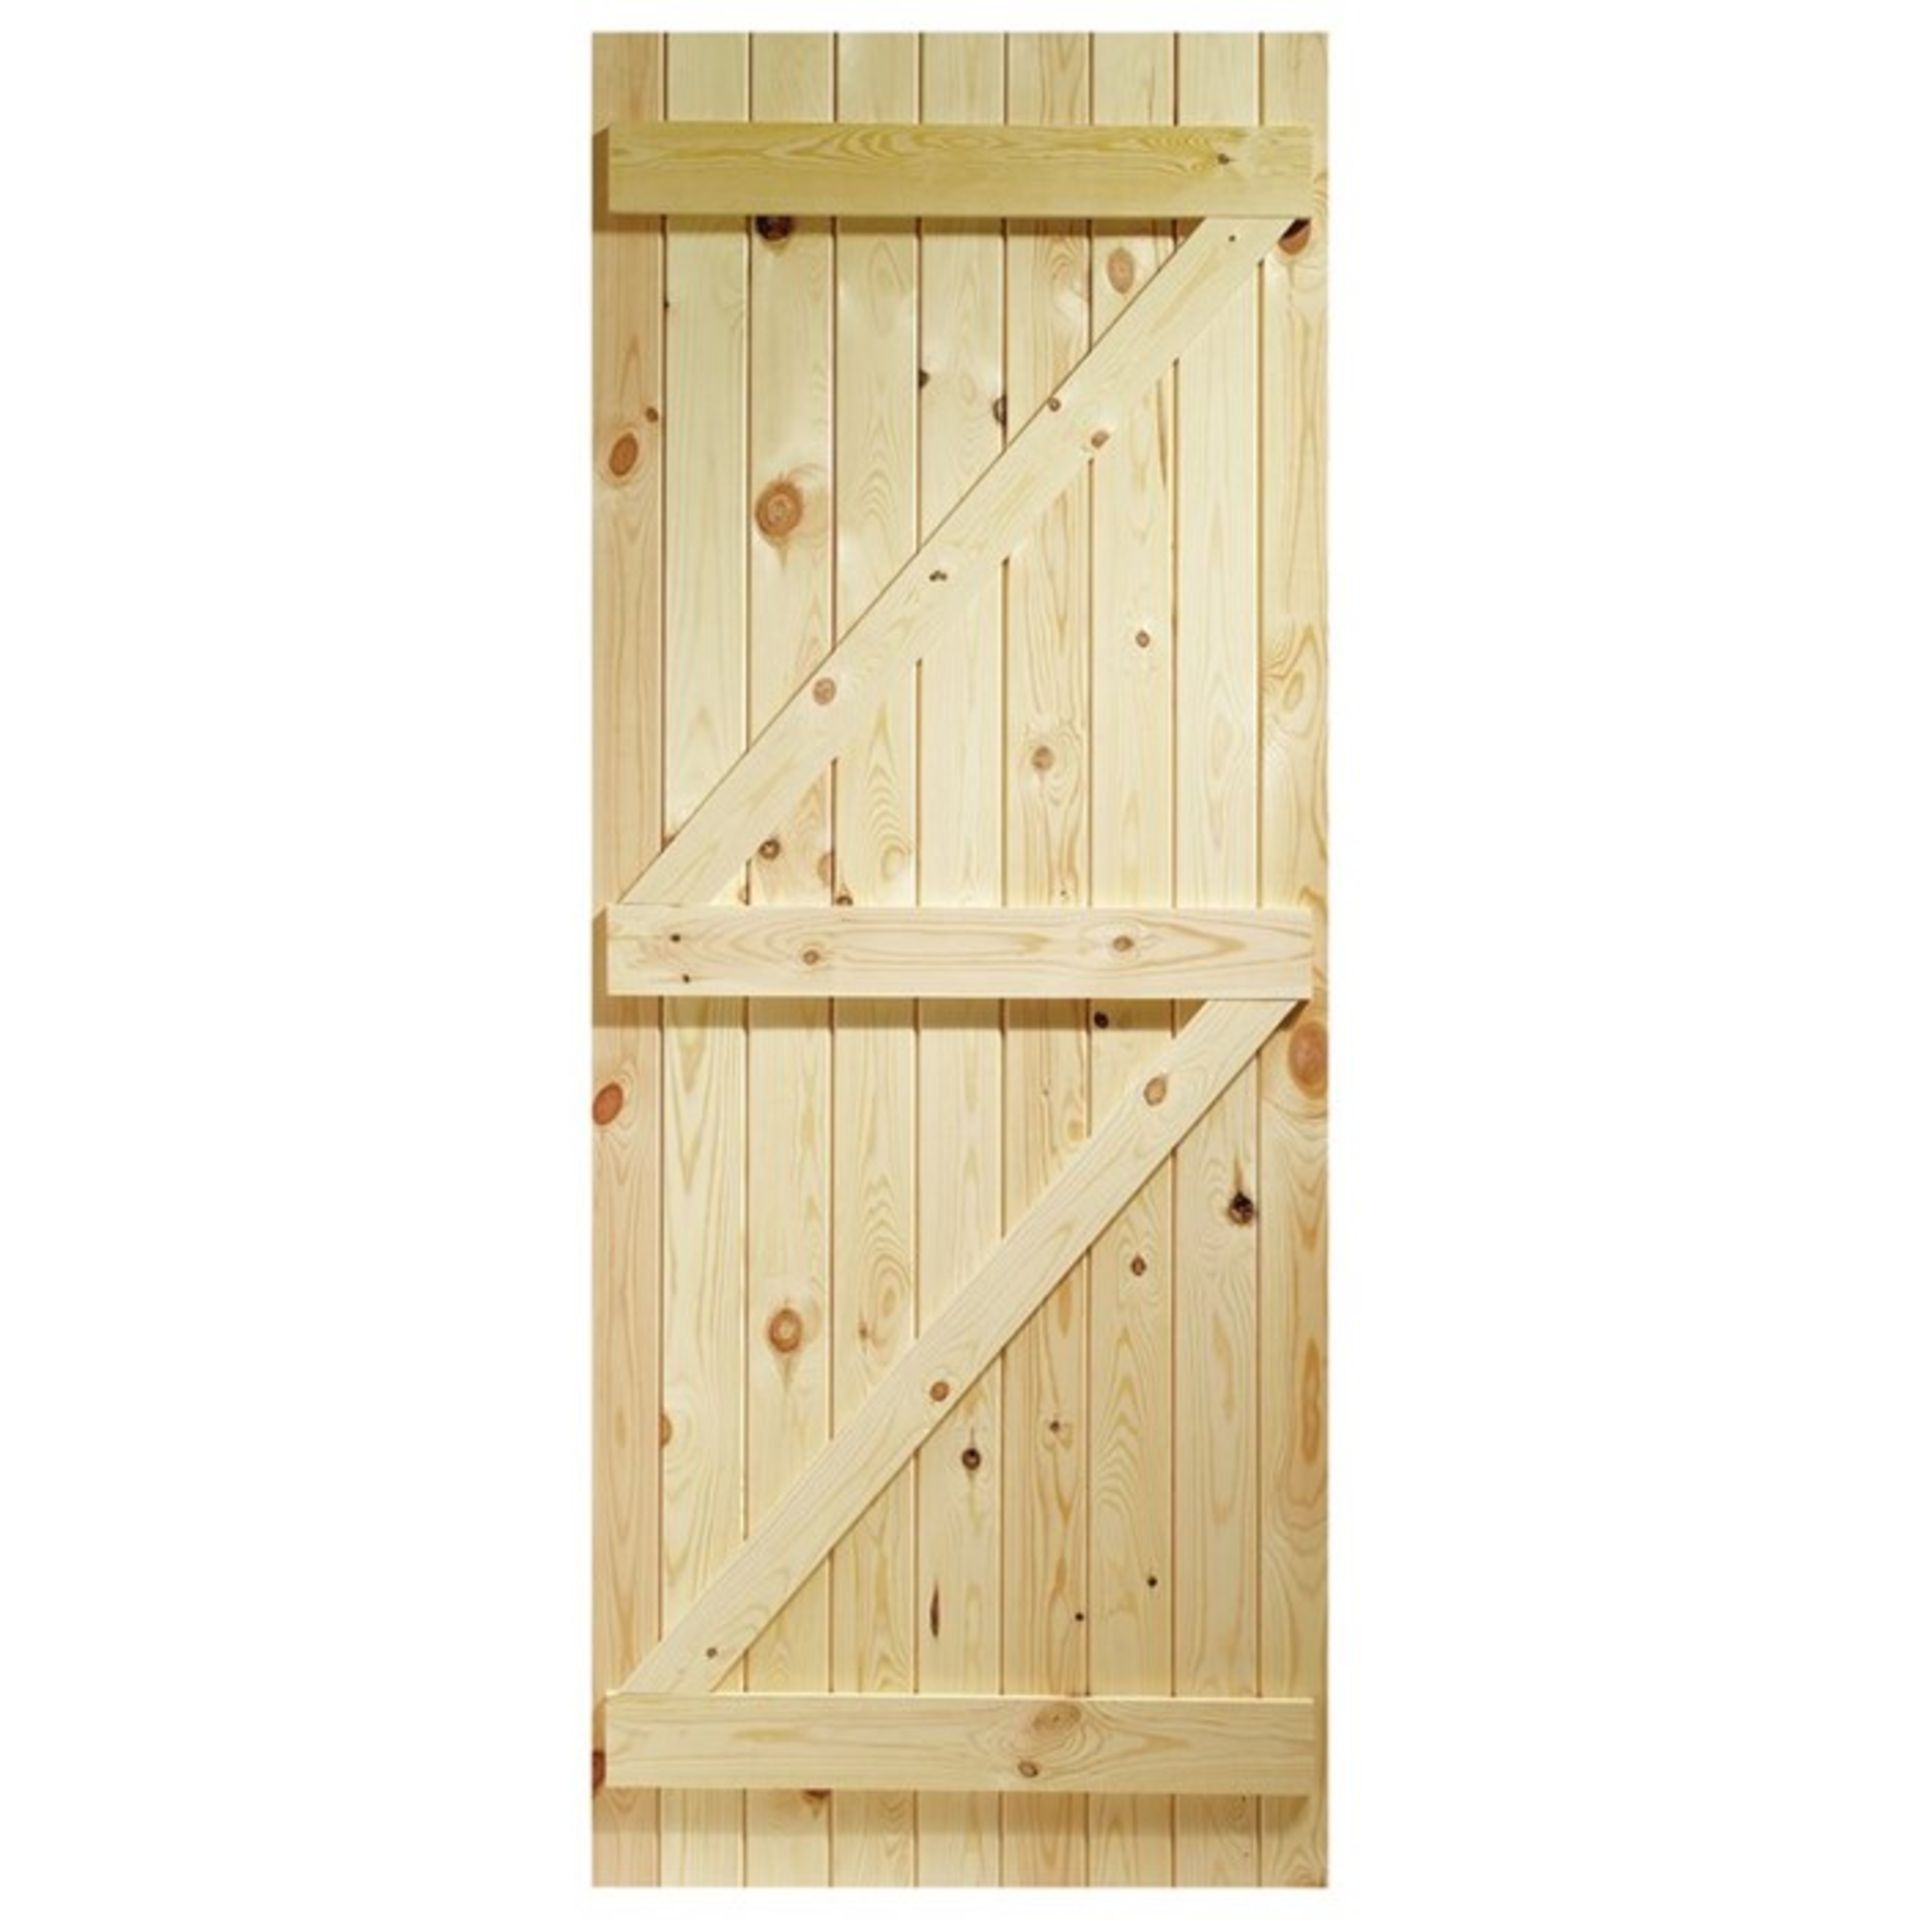 XL Joinery,Unfinished Wood External Door RRP -£57.99(20813/3 -SDJD1585)